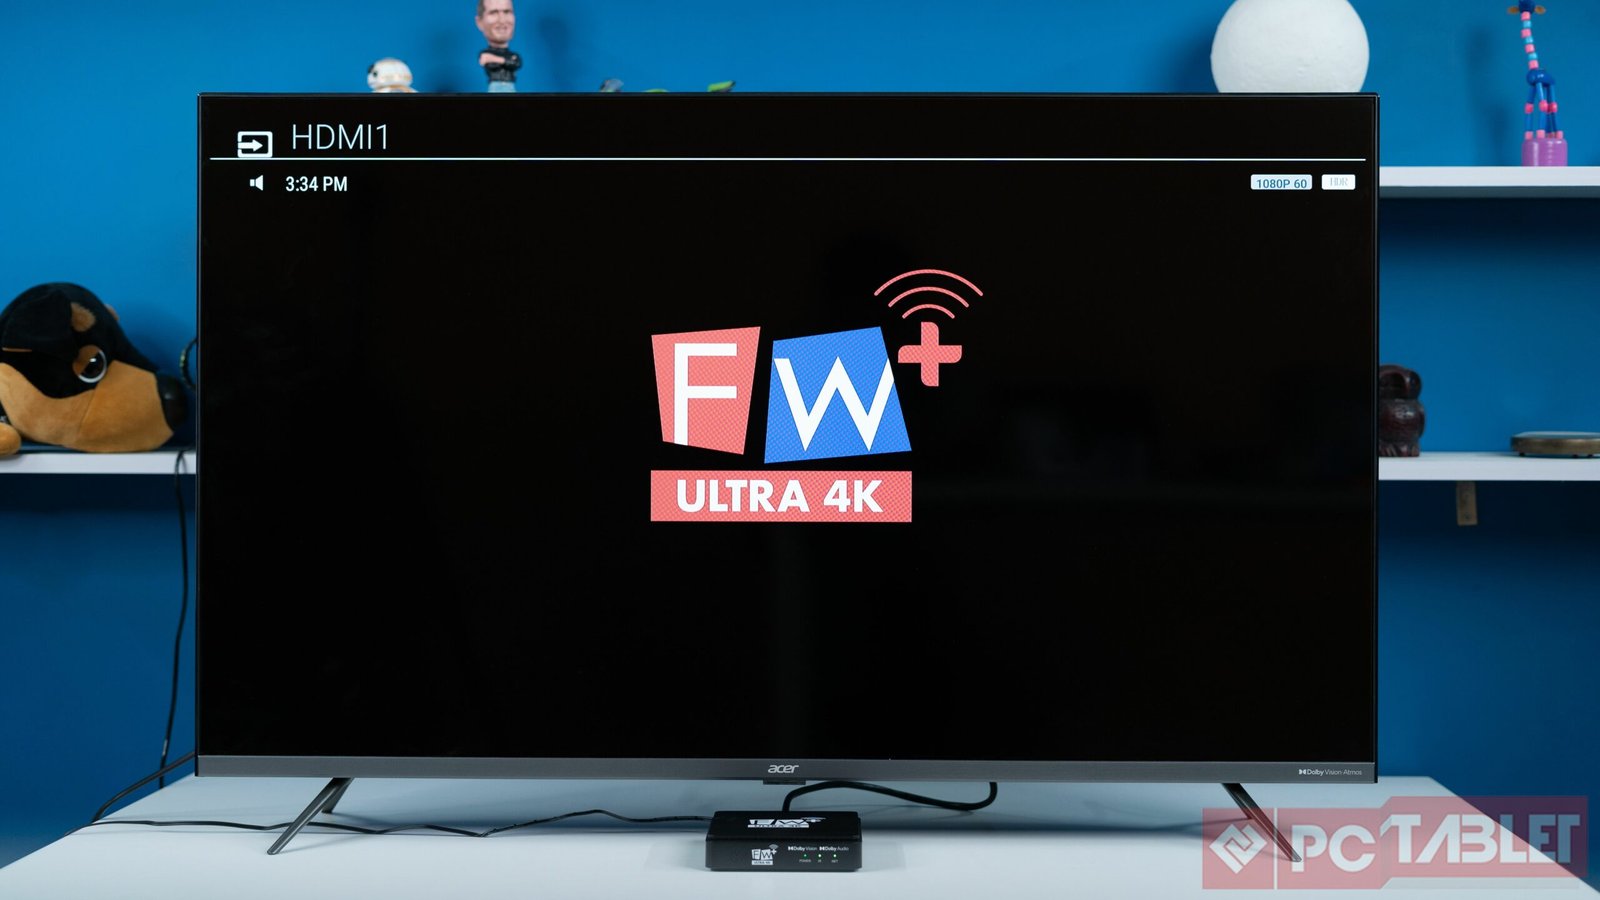 Fastway Ultra 4K Android TV AVI00047 result scaled